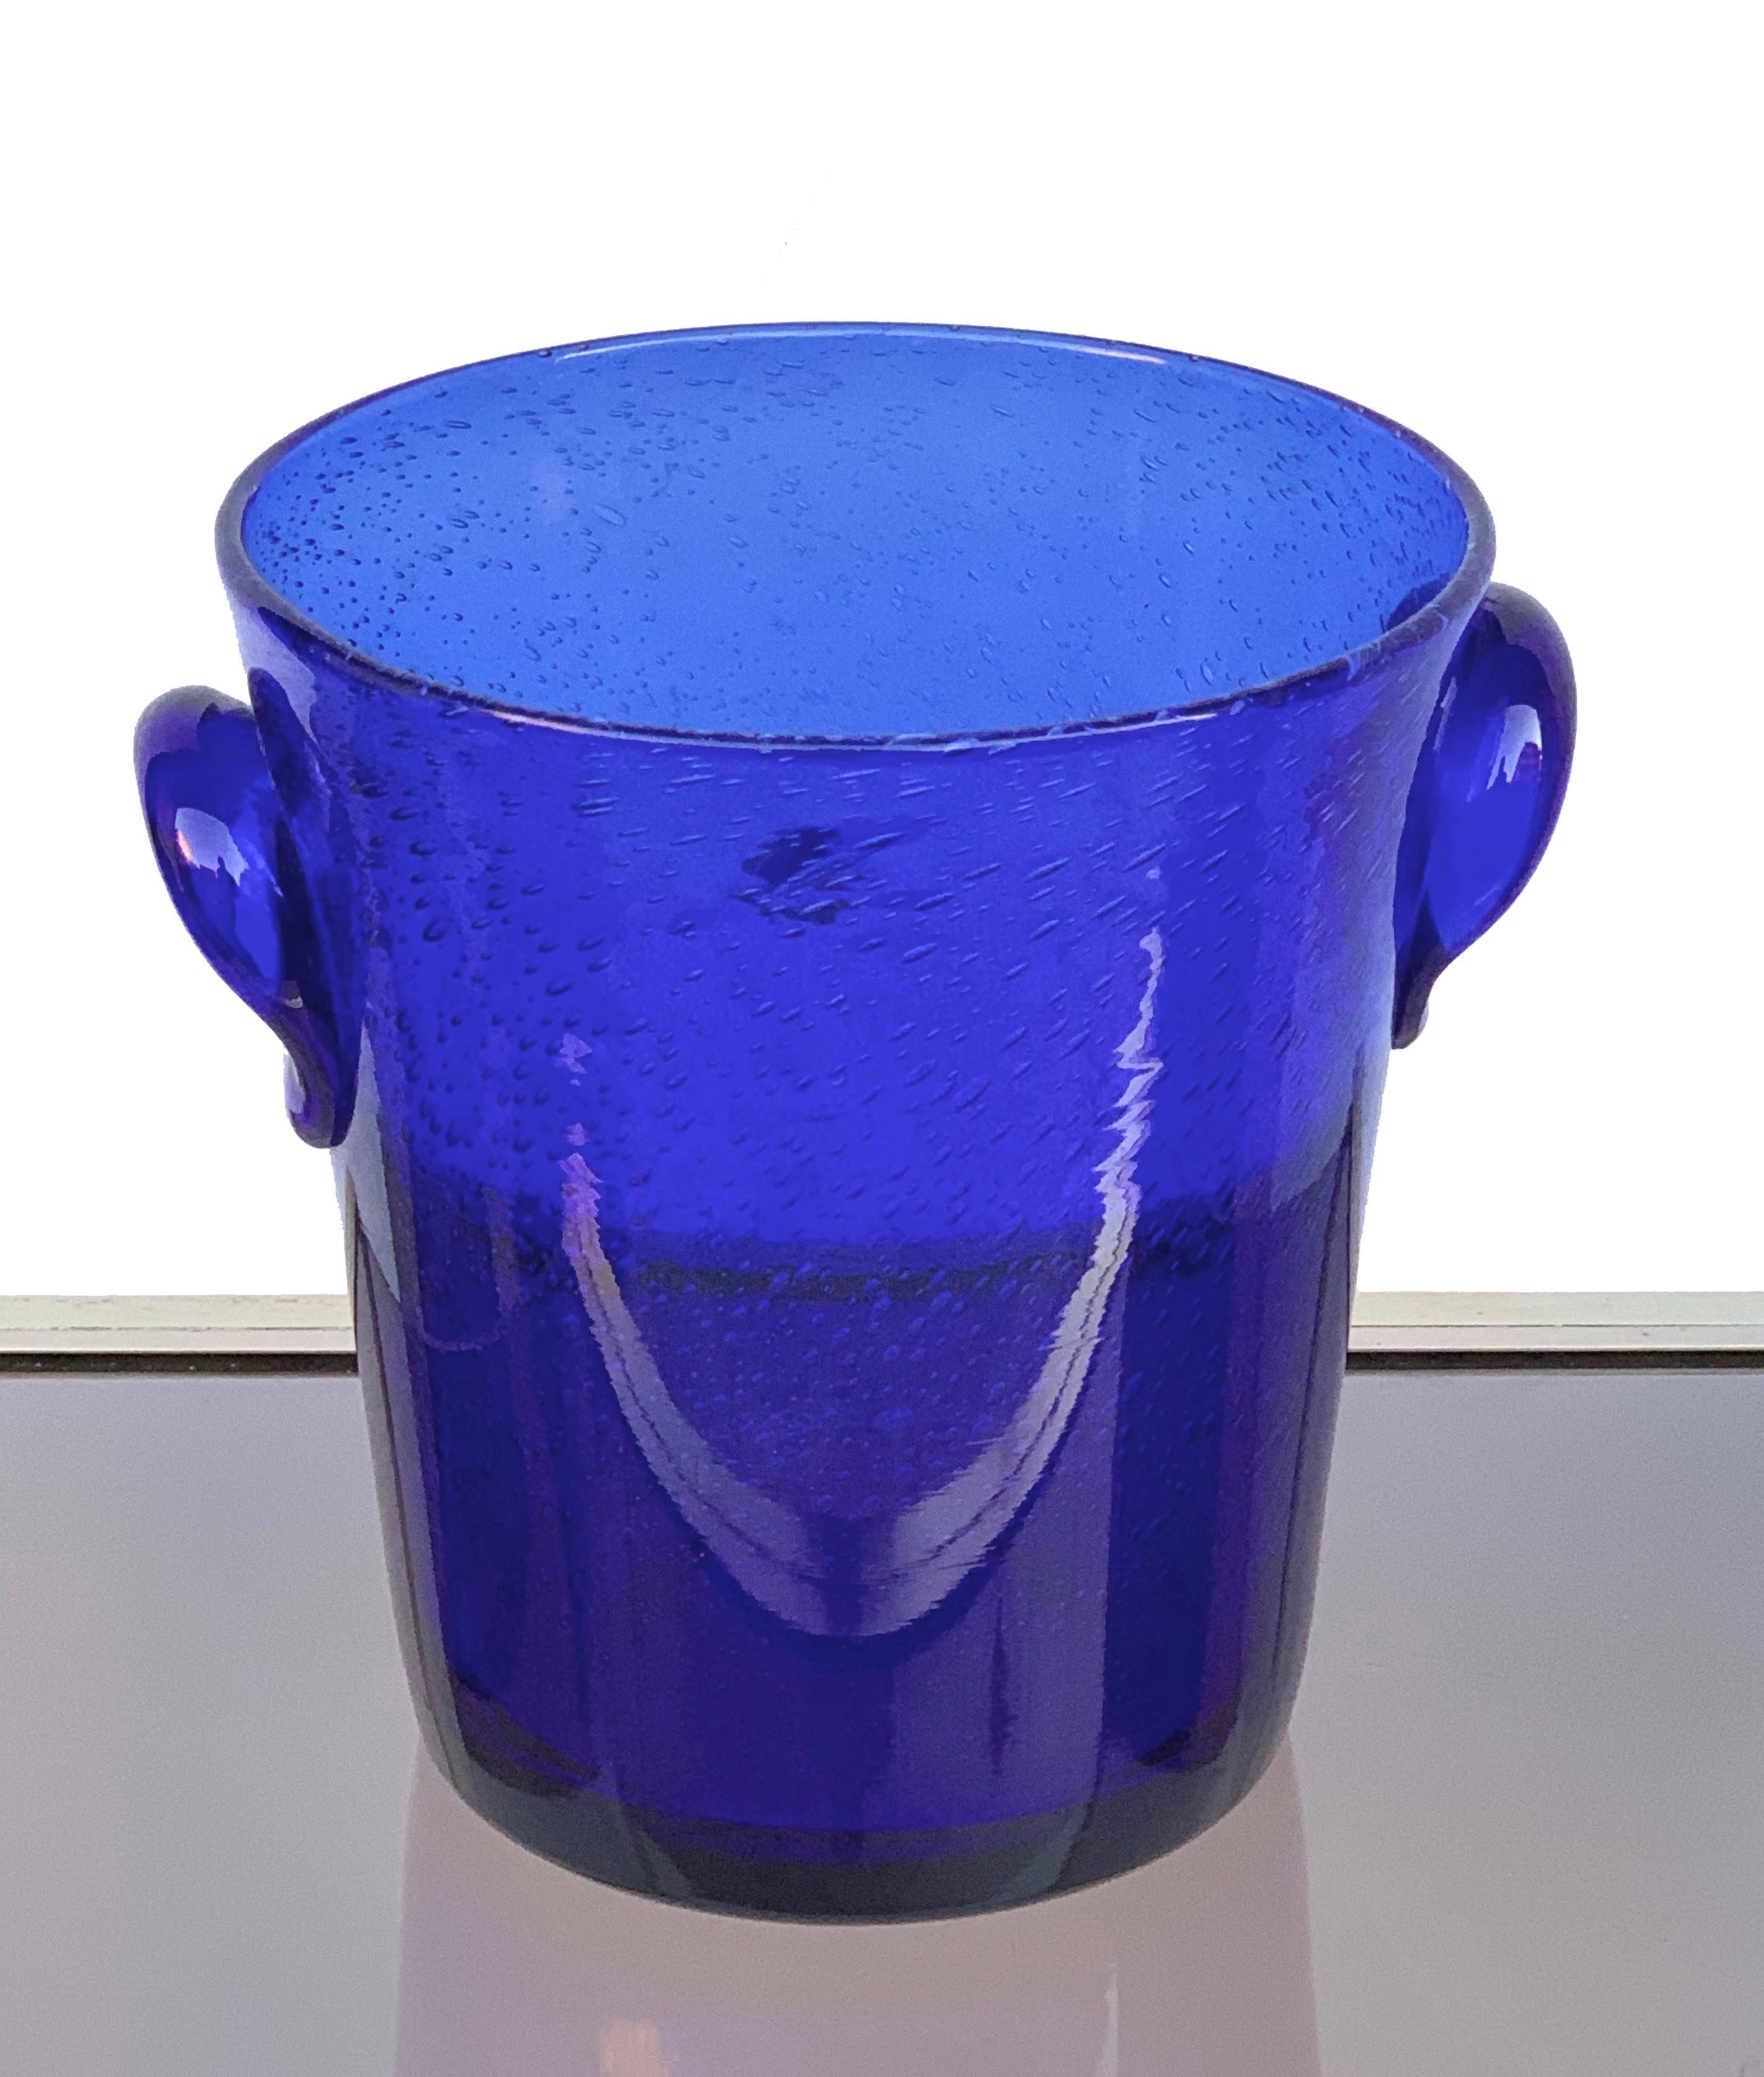 Showy and particular ice bucket in blue glass with air bubbles. Produced by La Verrerie De Biot, France, 1980s.